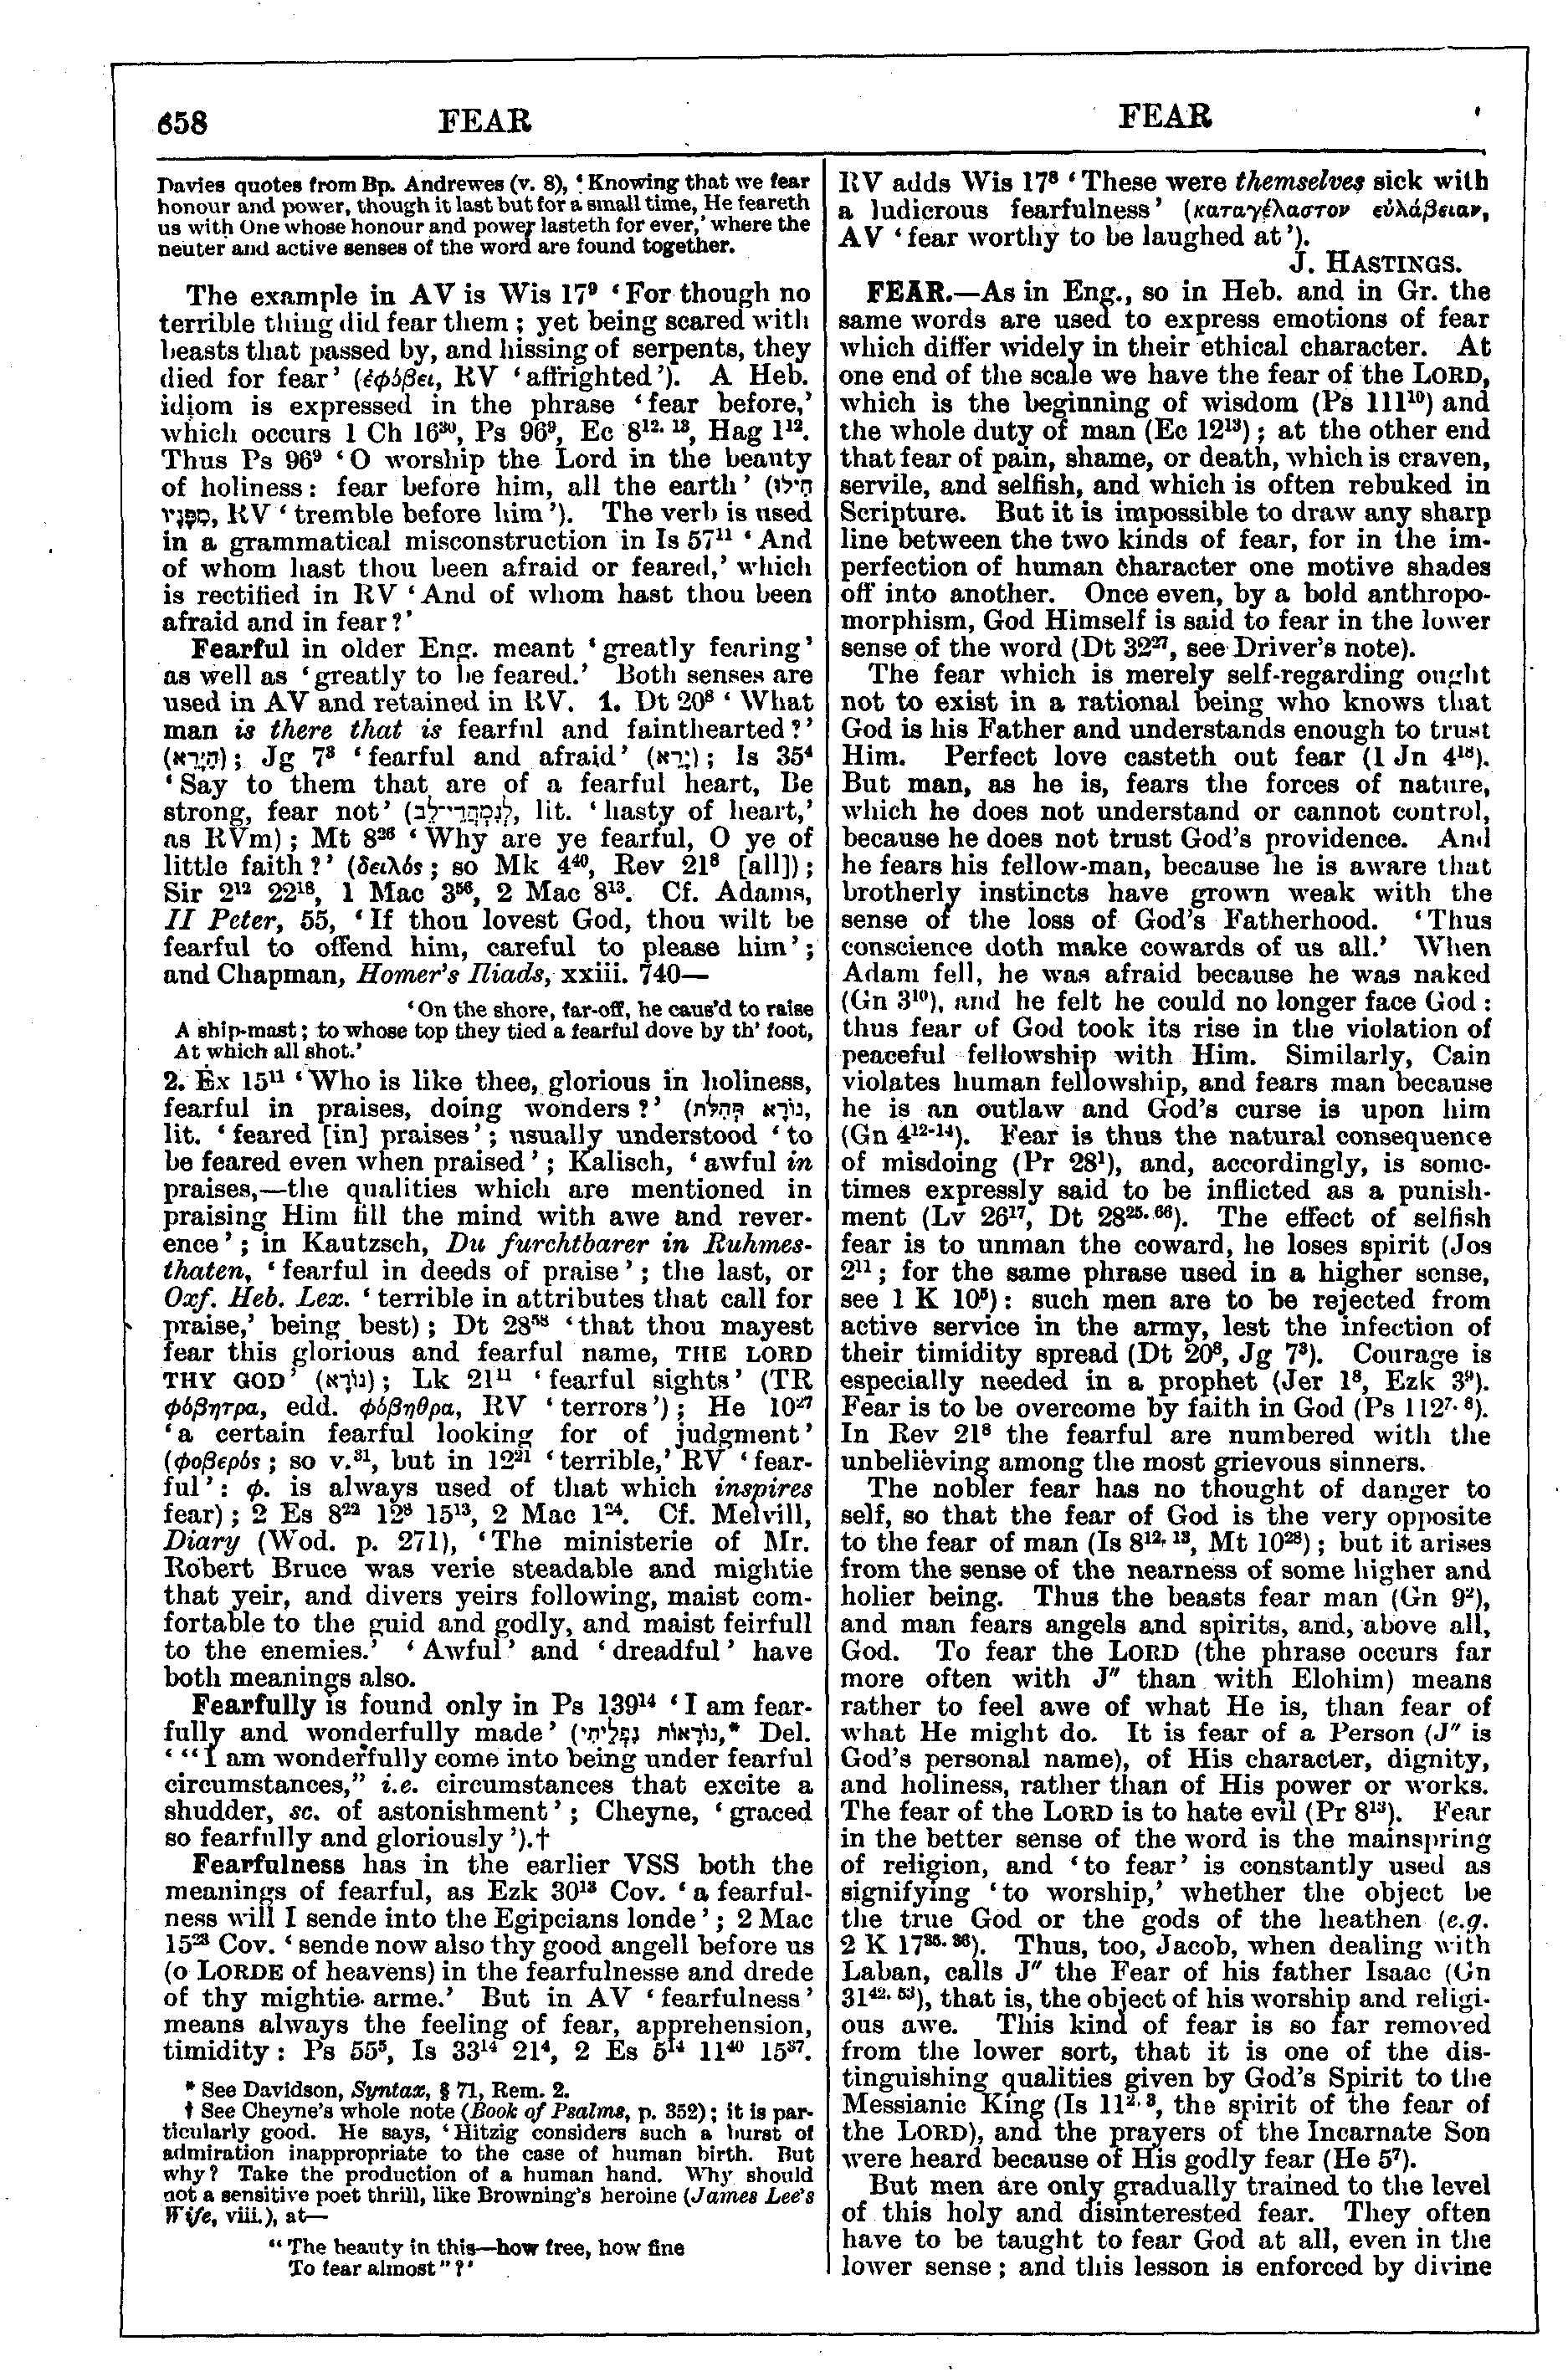 Image of page 858